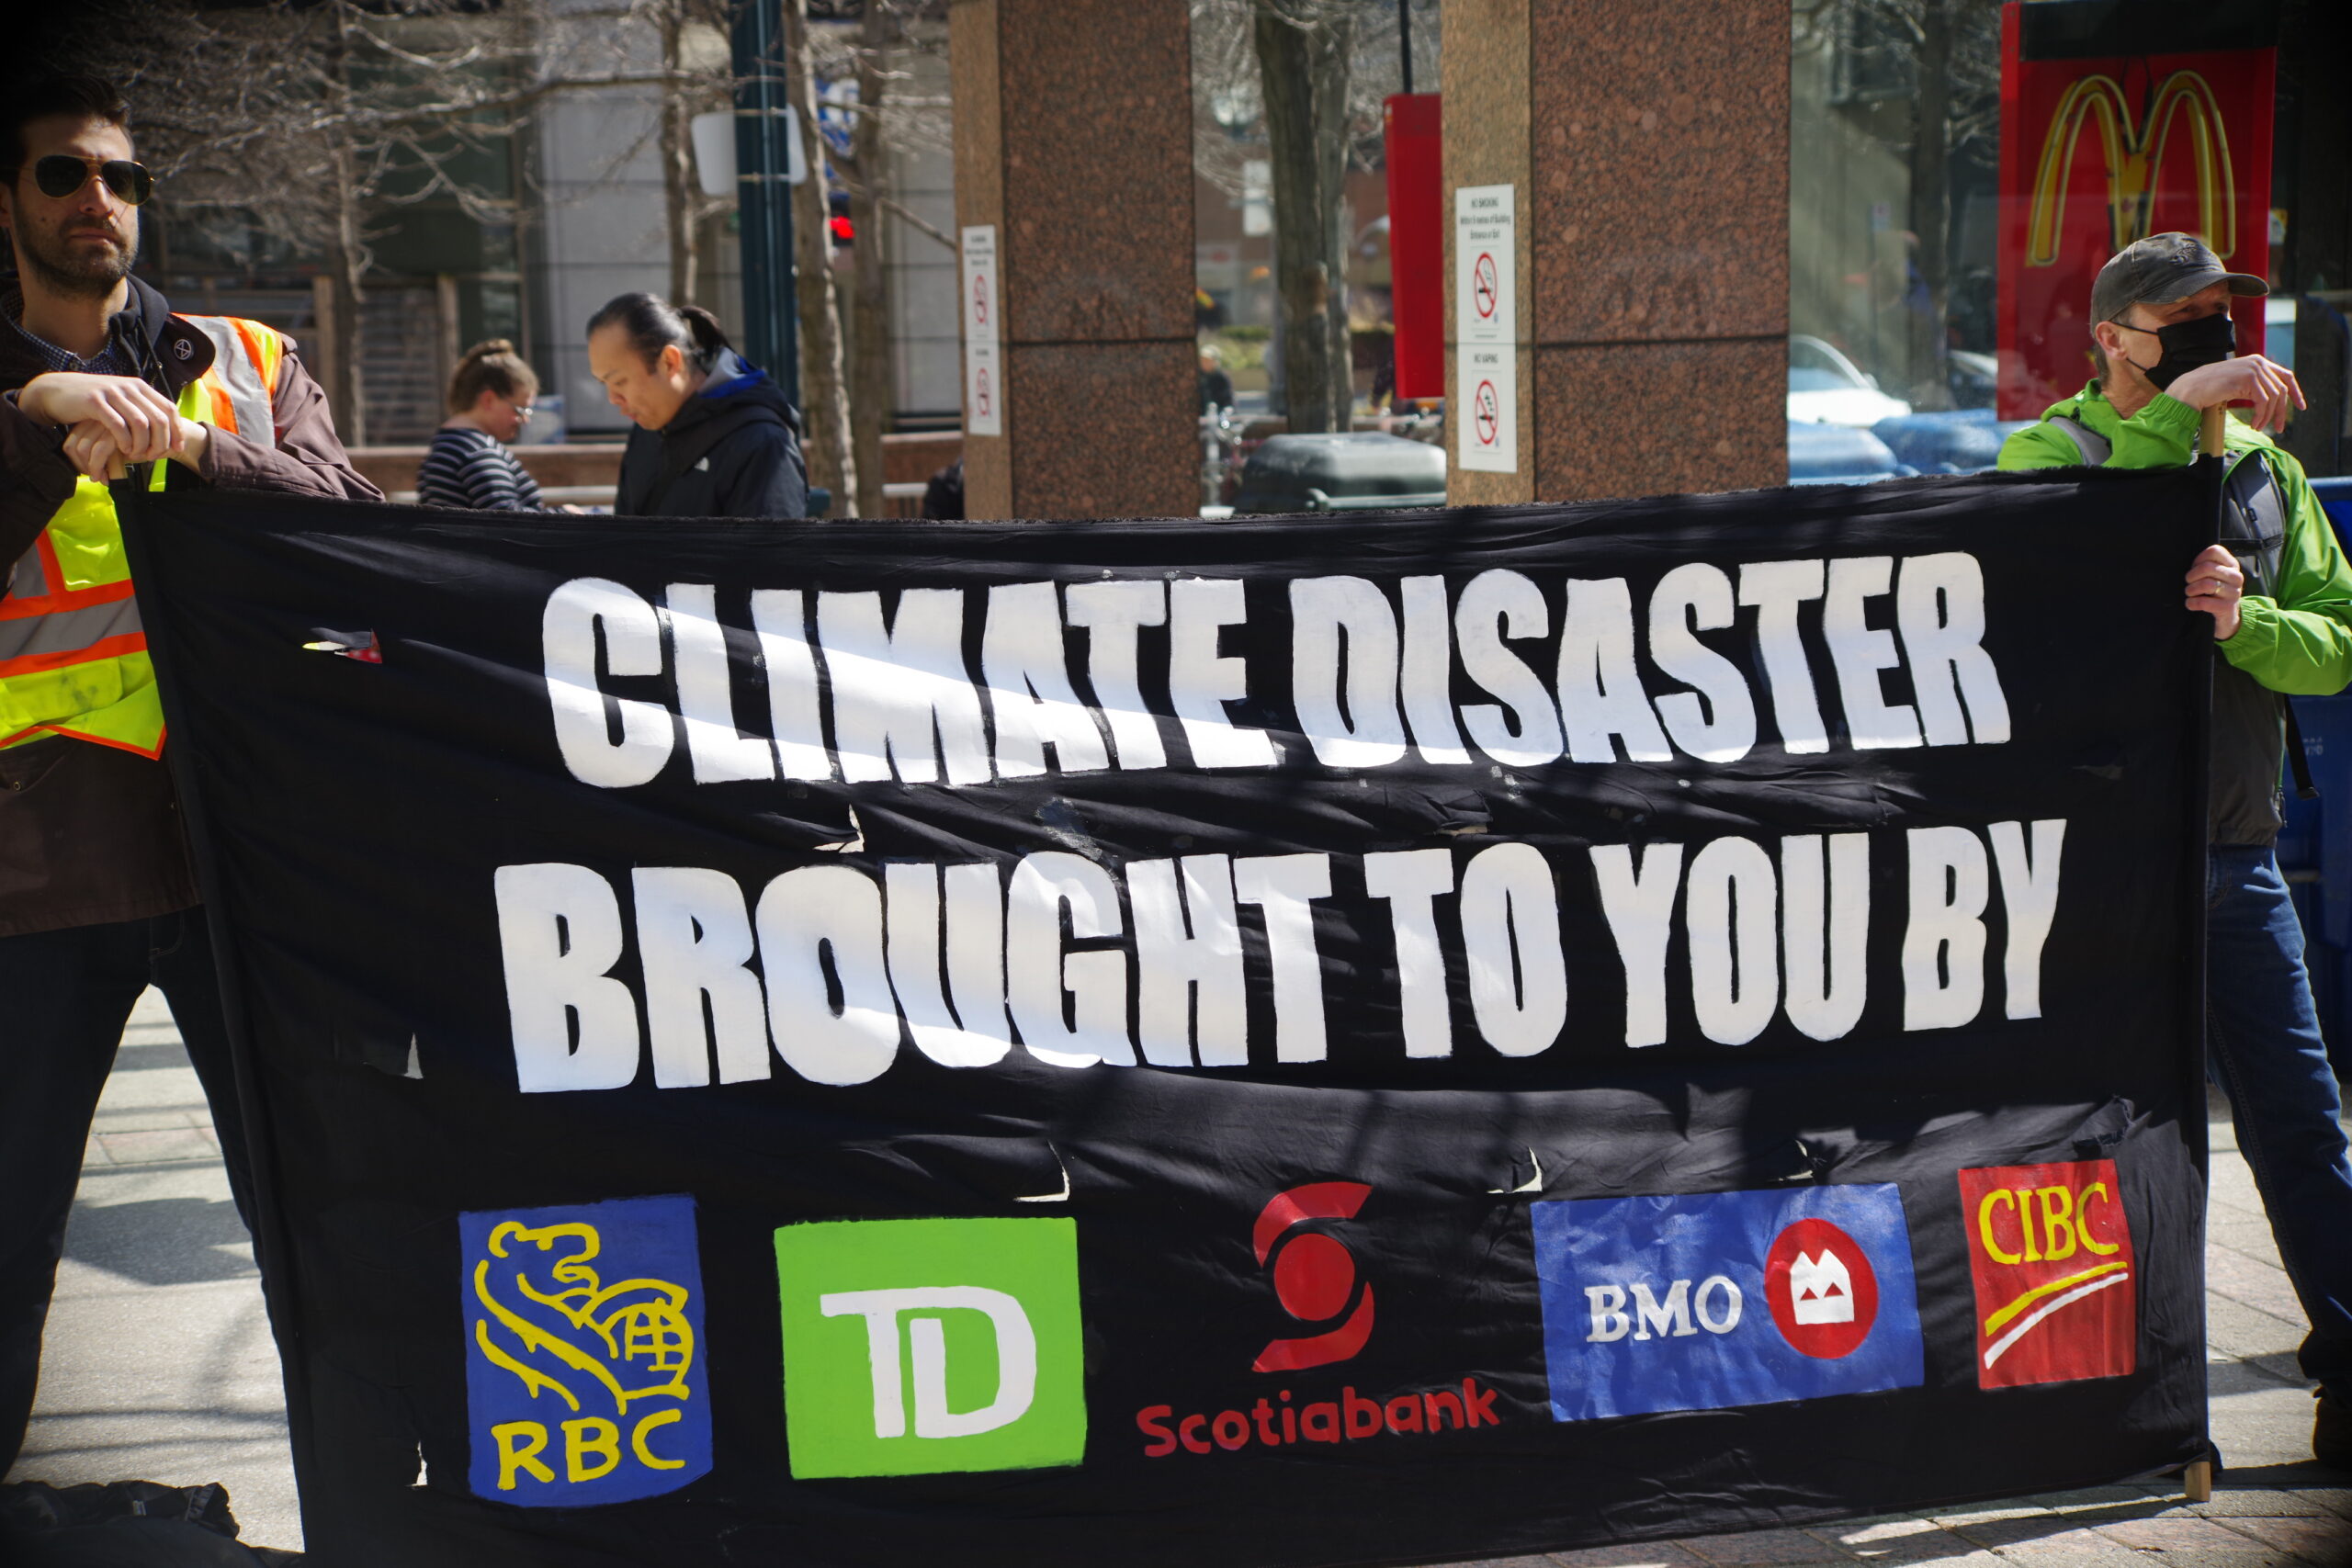 Two white men in yellow reflective safety vests are standing in a downtown Toronto street holding a black banner that reads "Climate disaster brought to you by" and then shows illustrations of the RBC, TD, Scotiabank, BMO and CIBC logos.